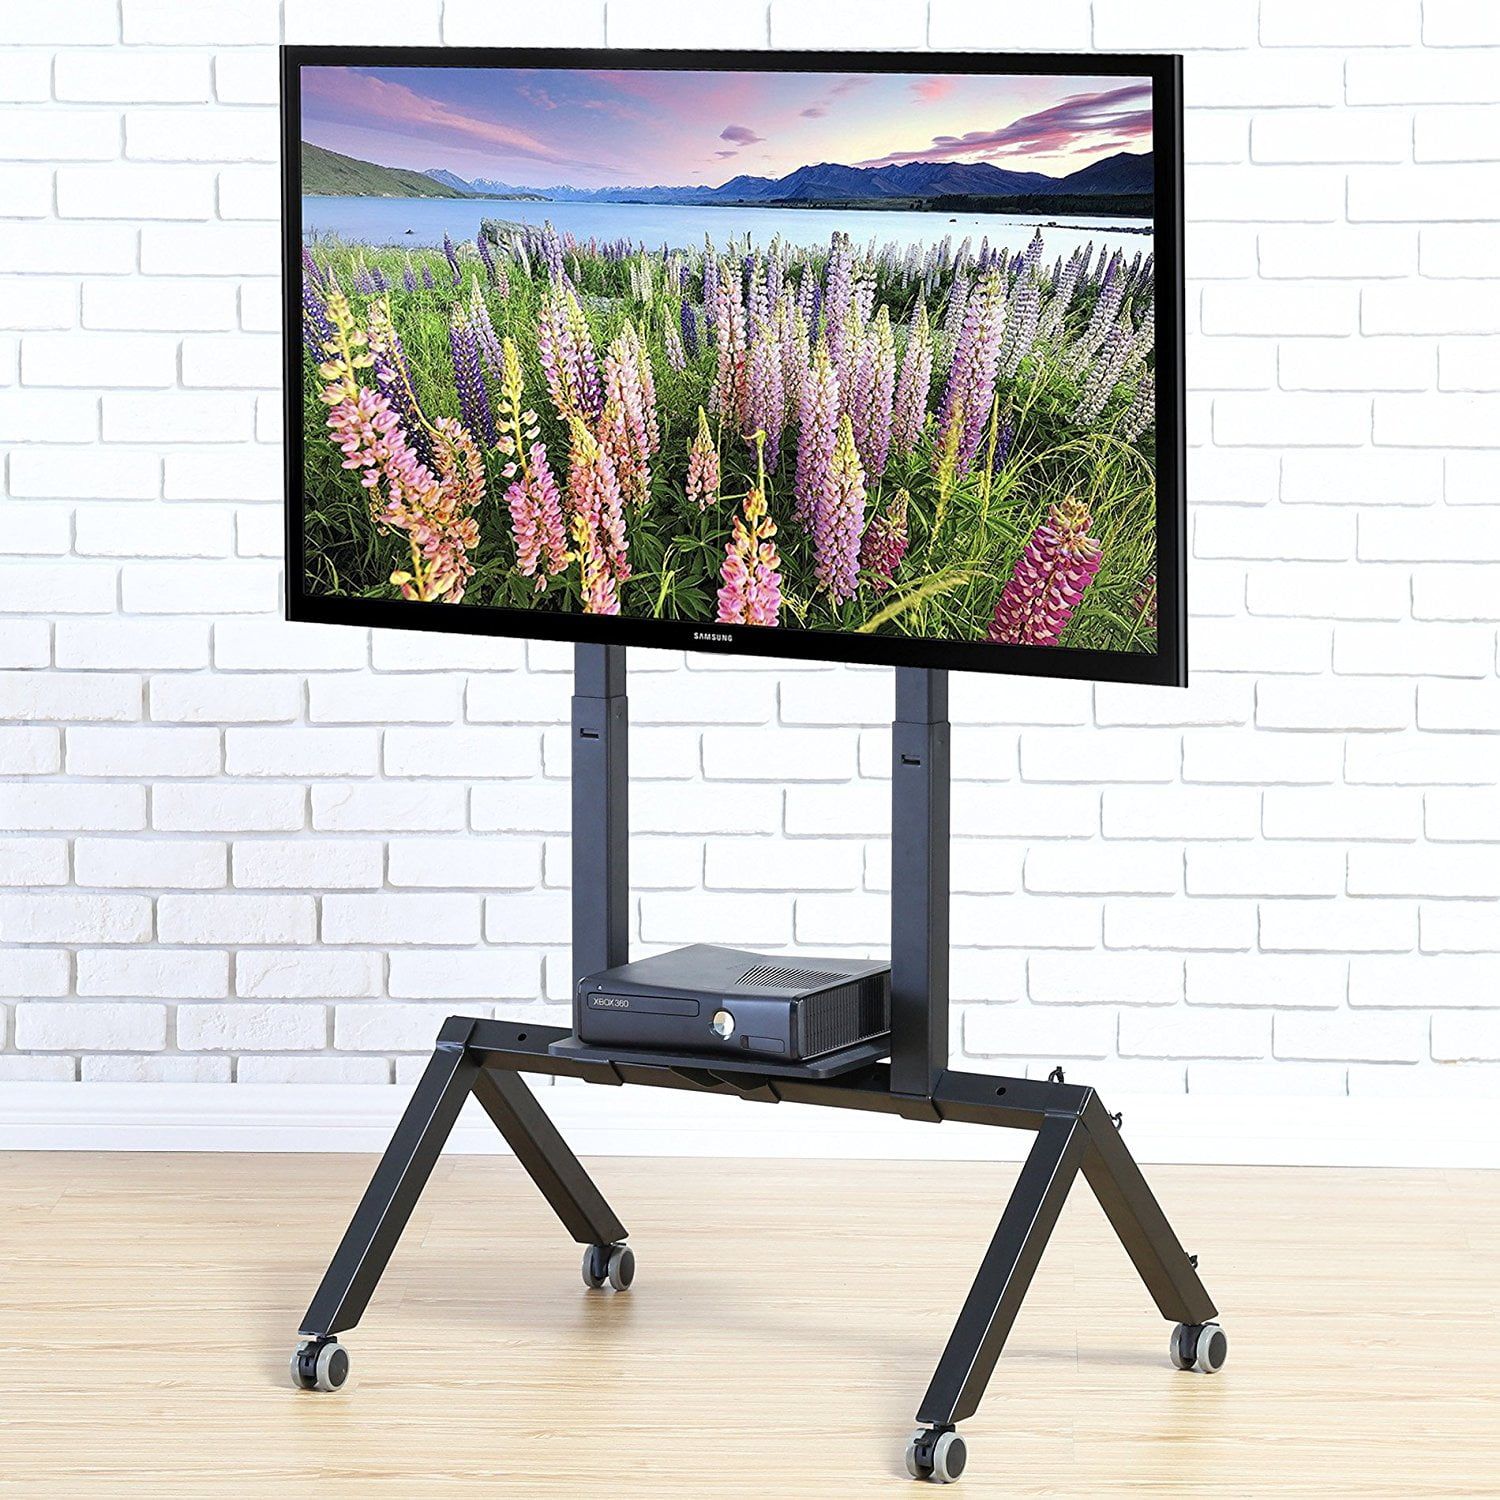 Fitueyes Mobile Tv Cart For Lcd Led Plasma Flat Panel Tv Stand With Inside Foldable Portable Adjustable Tv Stands (View 20 of 20)